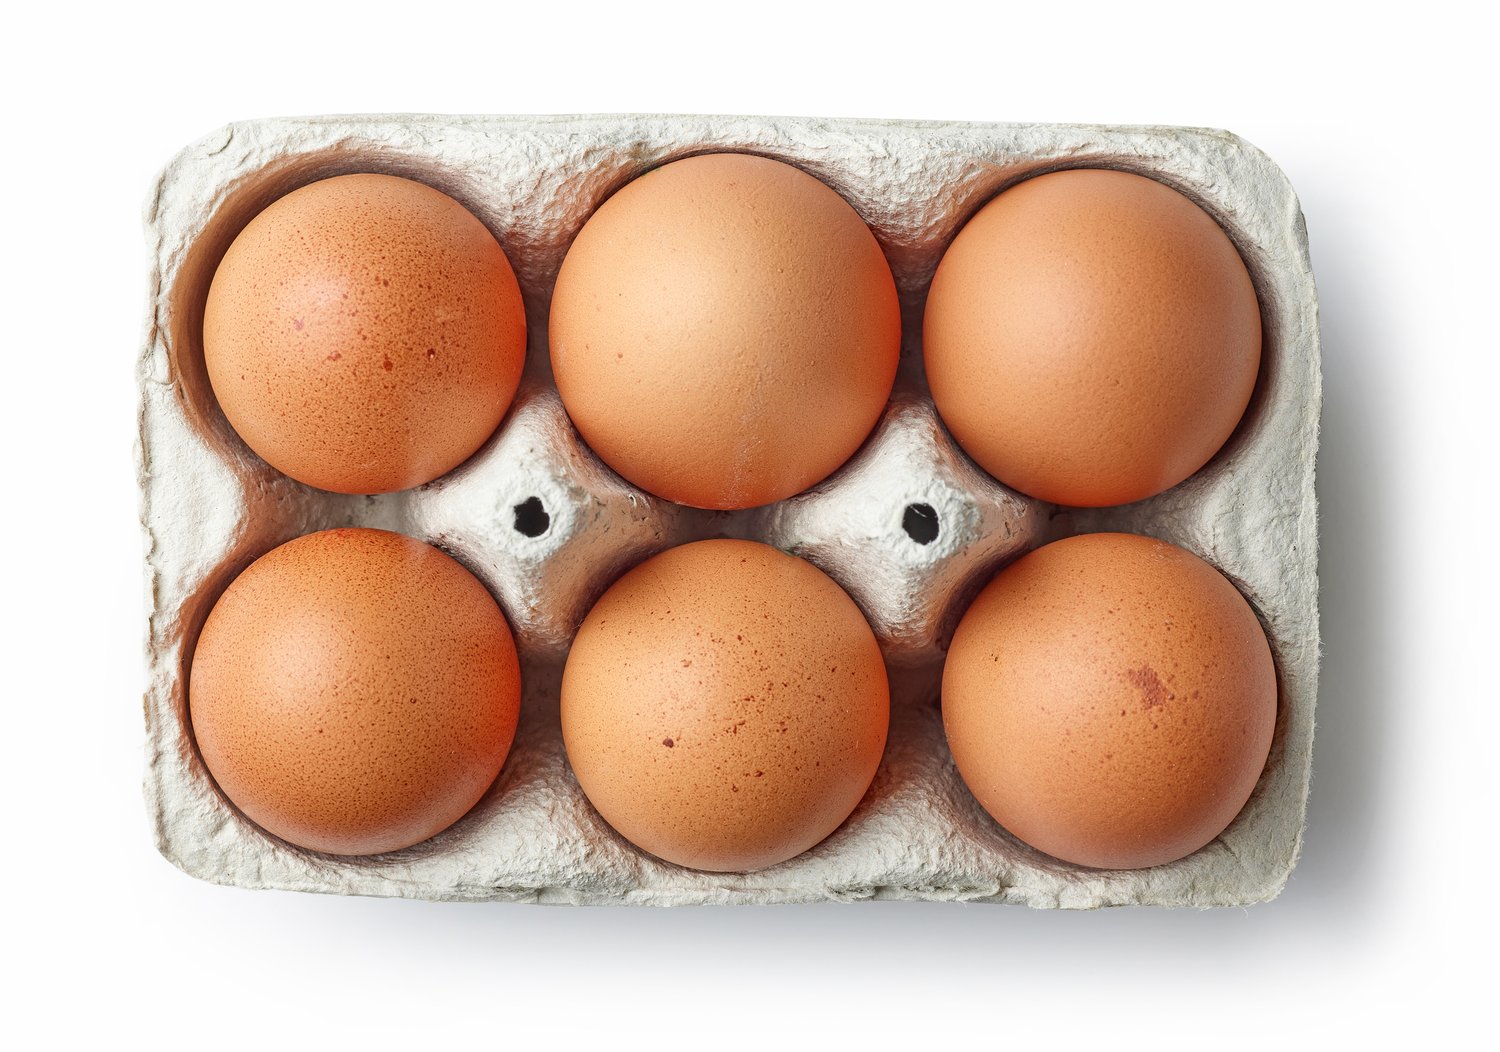 How Nutritious Are Eggs?